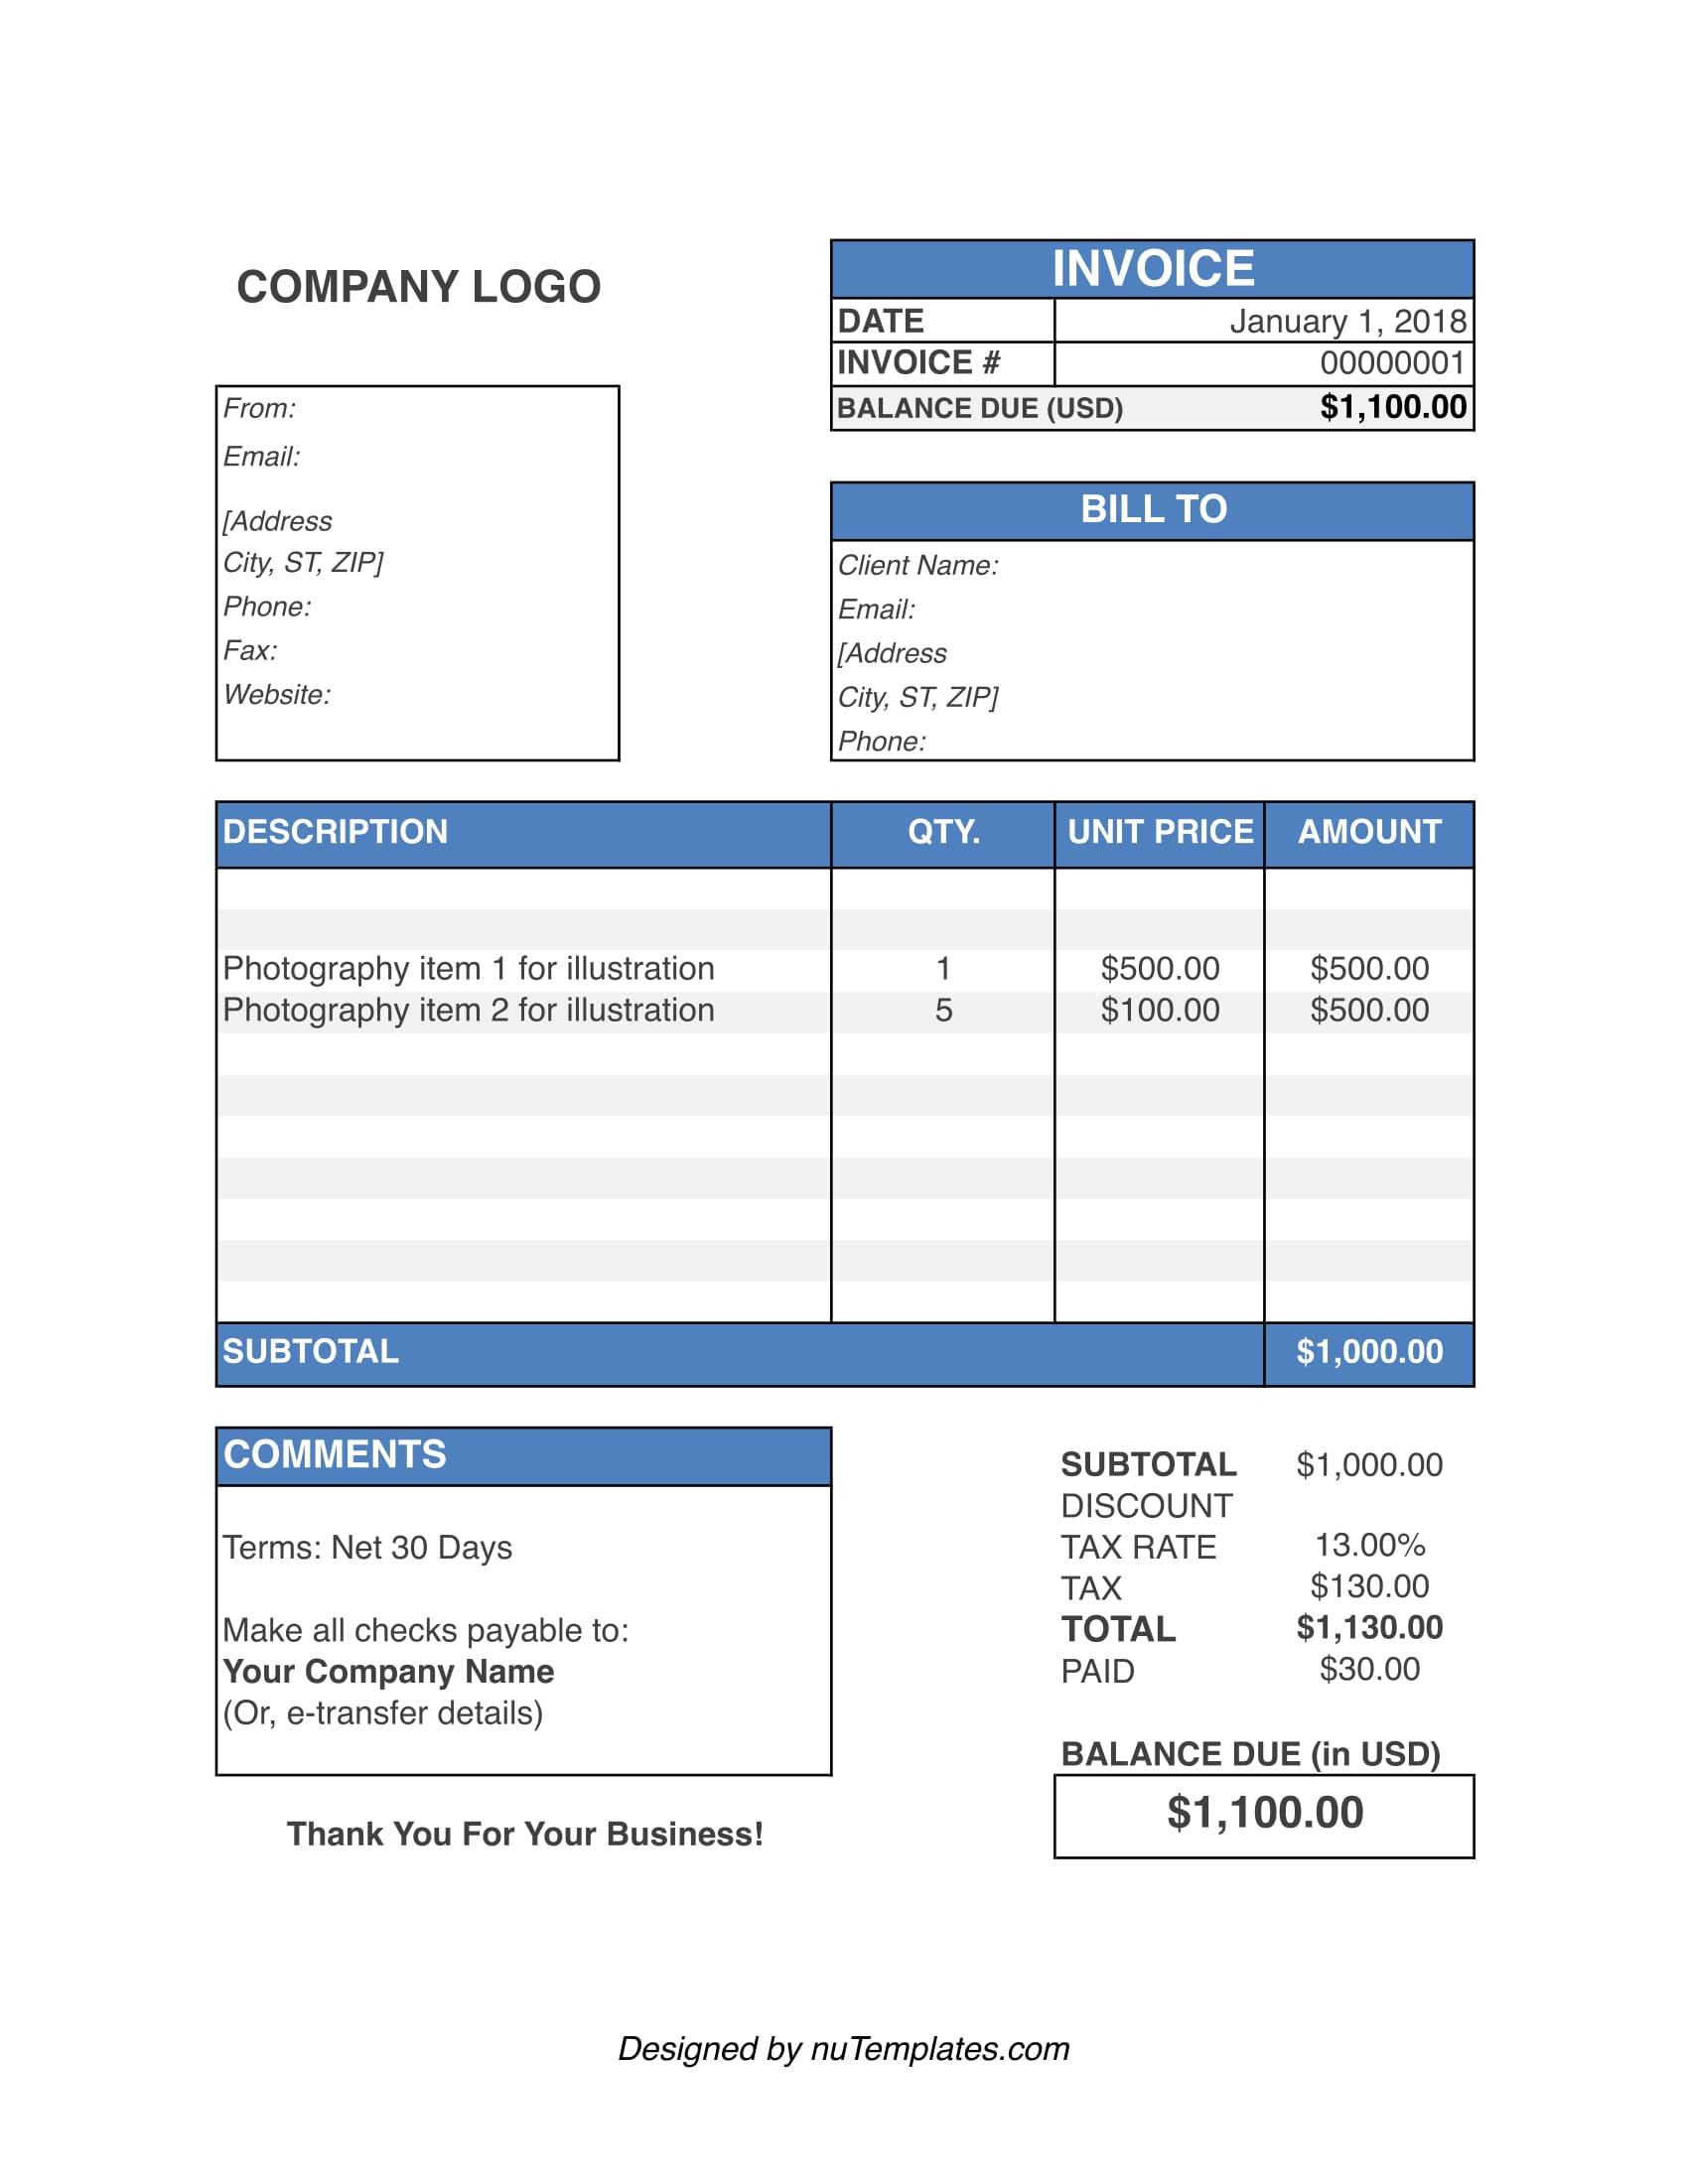 photography-invoice-template-photography-invoices-nutemplates